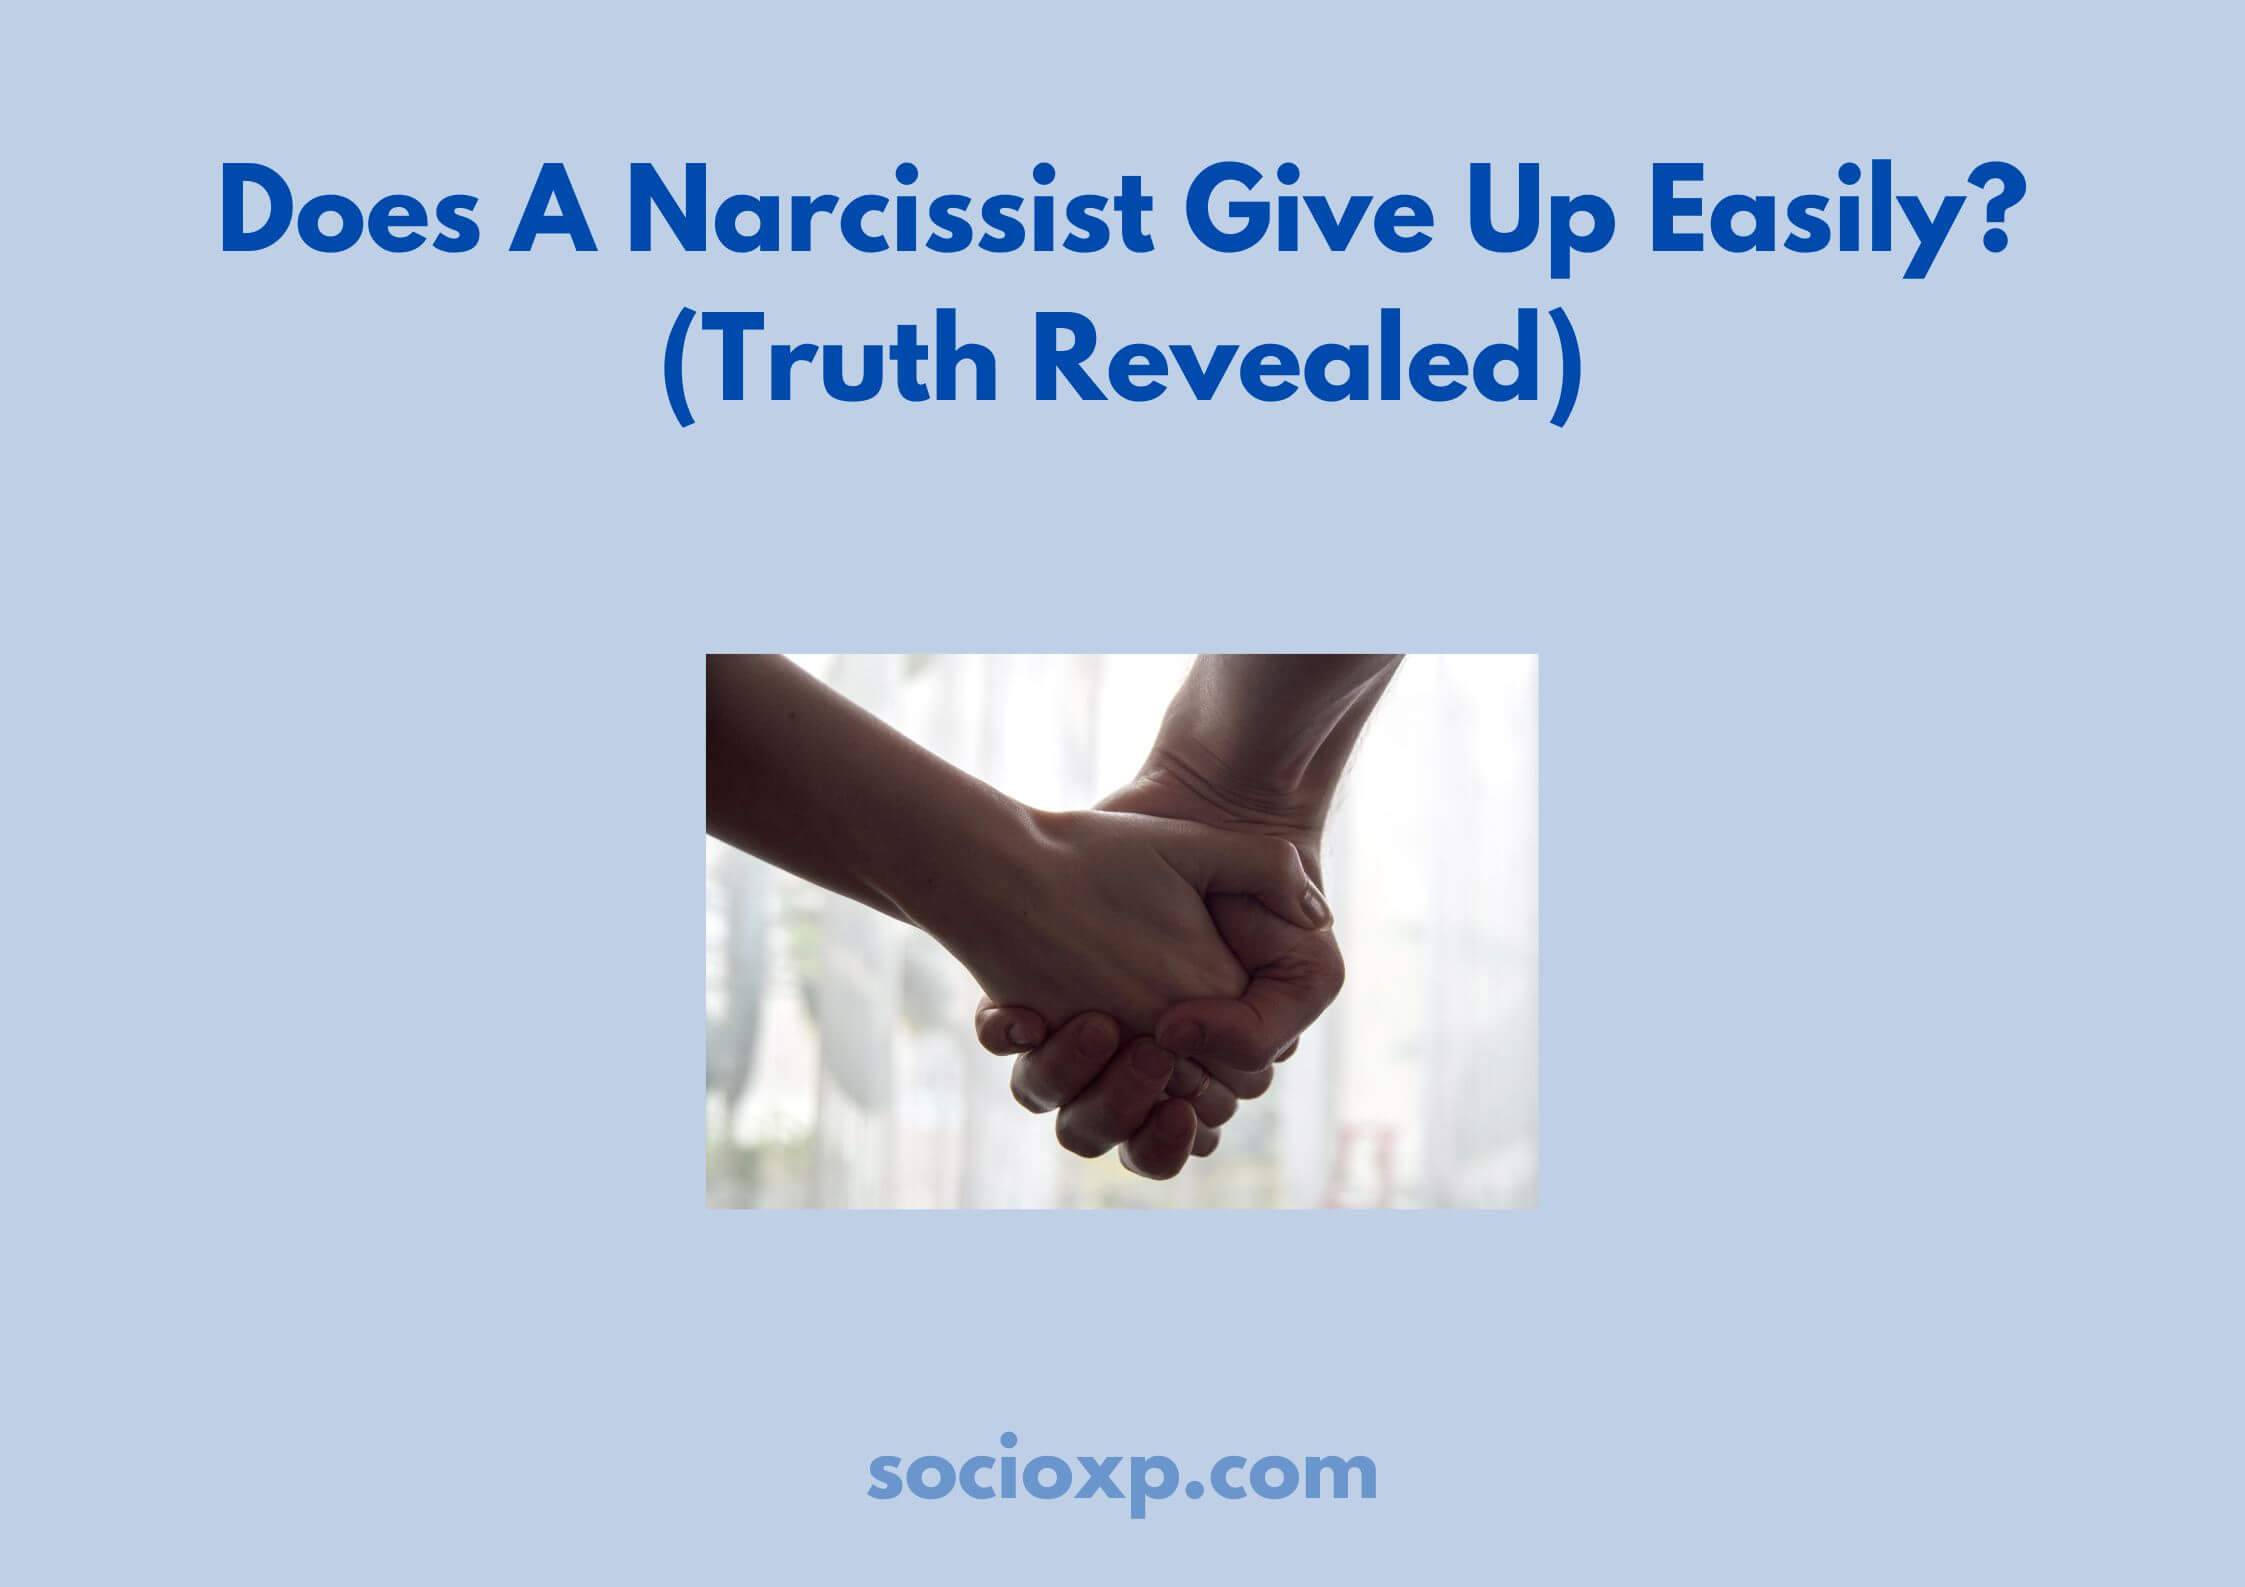 Does A Narcissist Give Up Easily? (Truth Revealed)